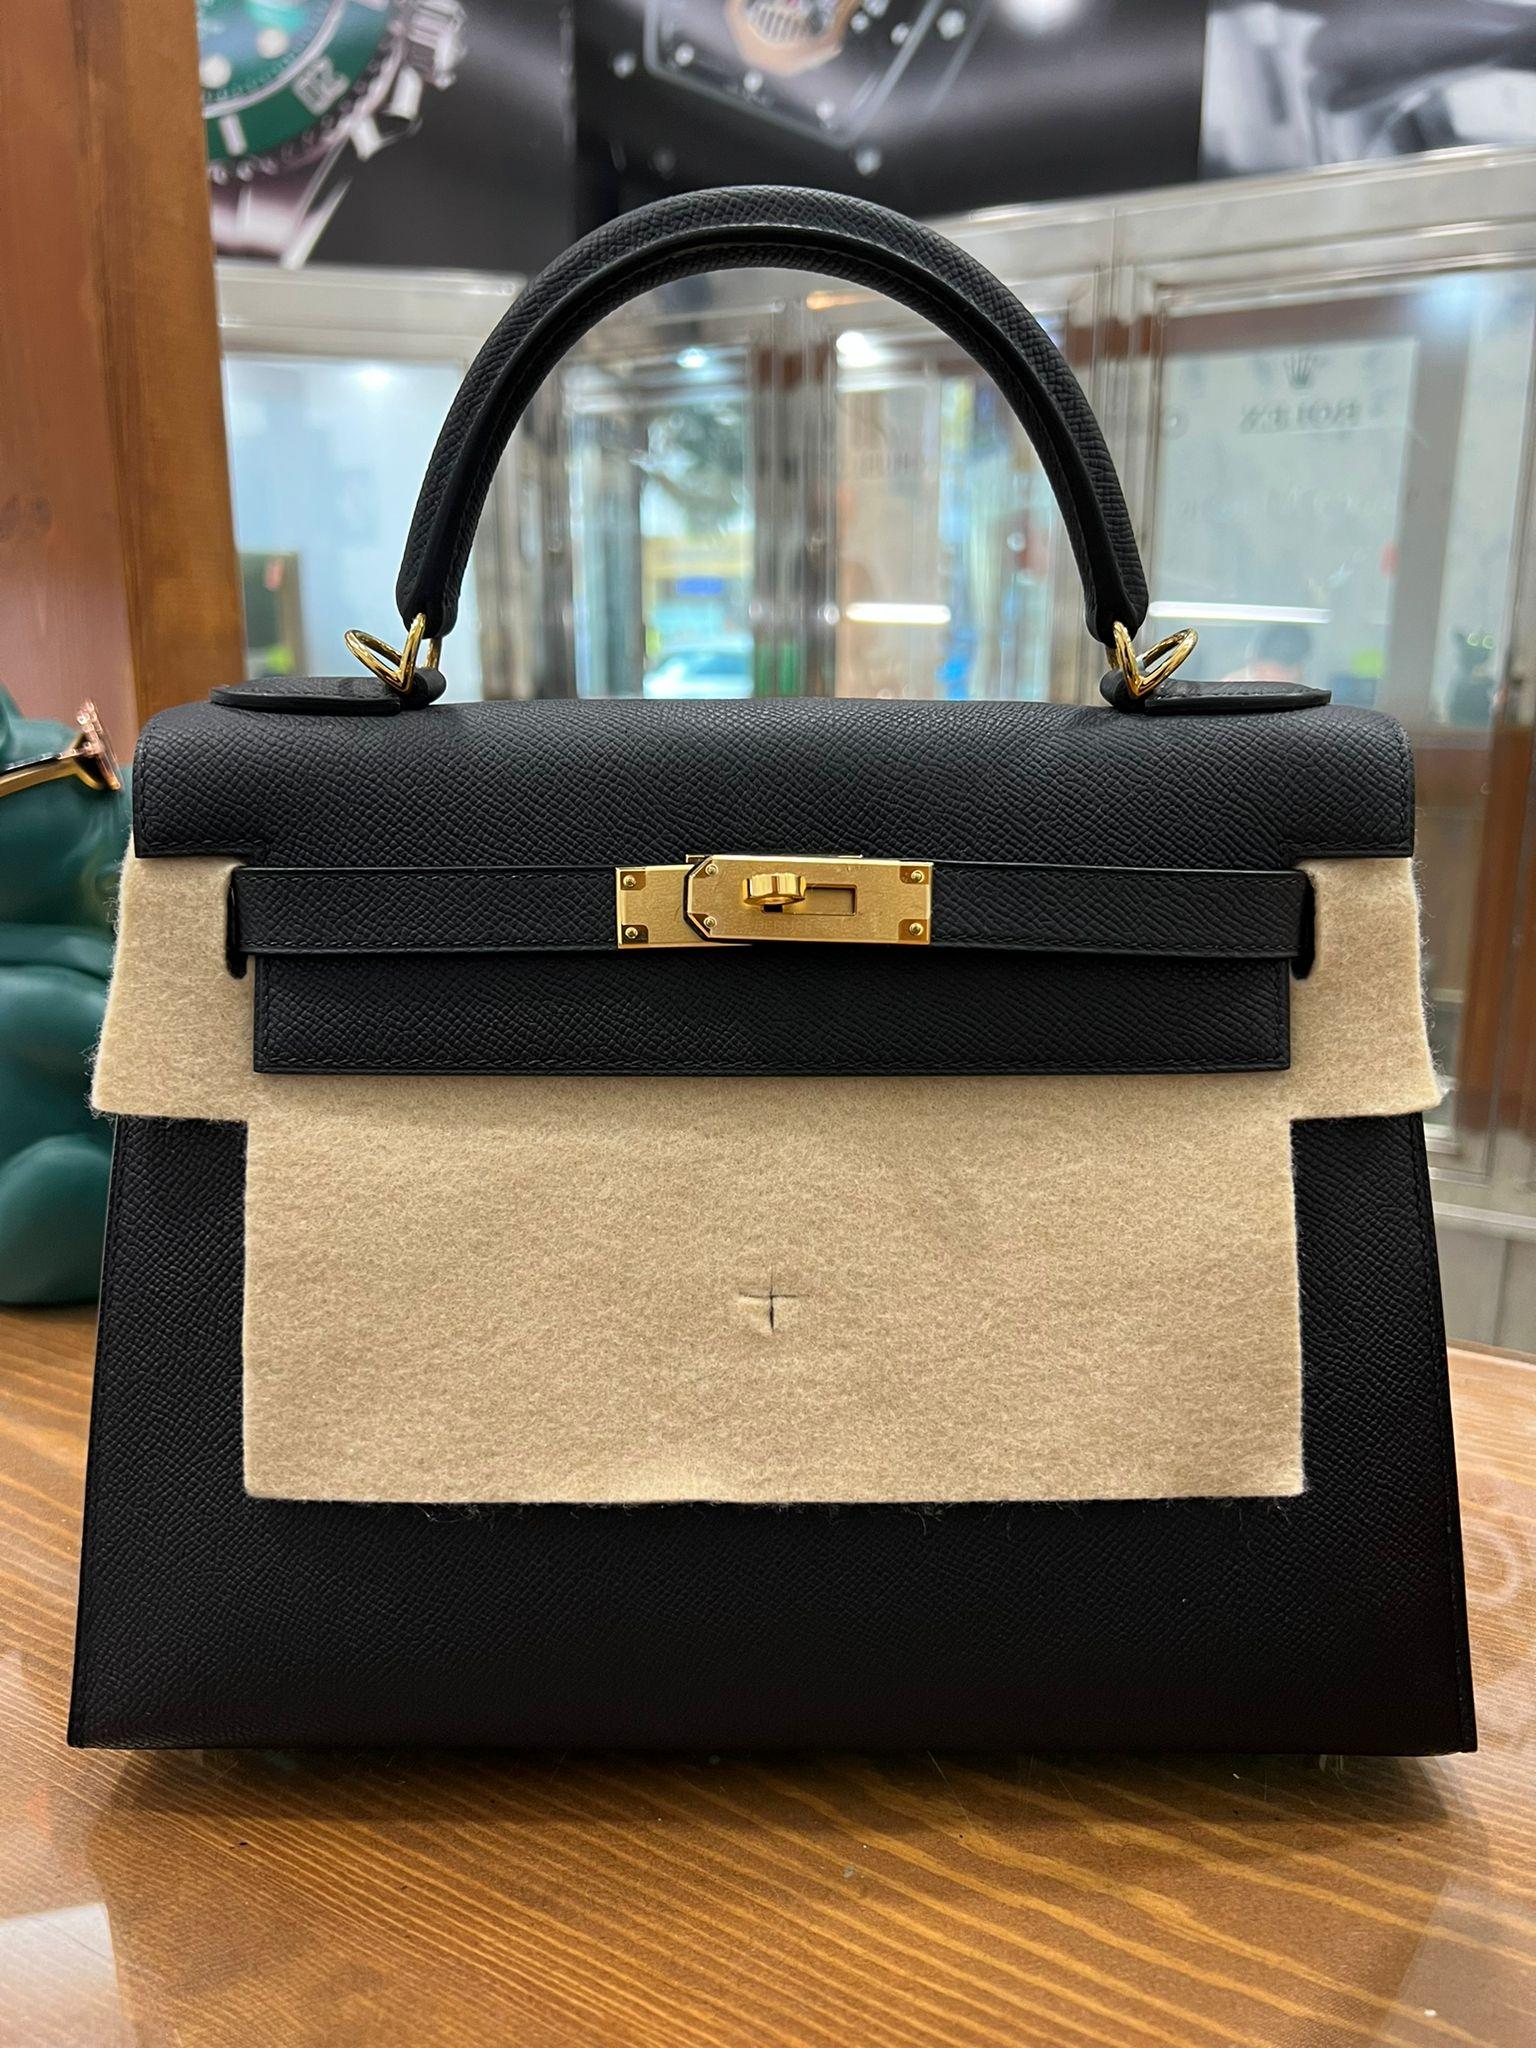 Hermes Kelly 28 Sellier Noir Black Epsom Gold Hardware 

New Never used. Rest of Boutique Stock.

Measurements : 22cm High x 28cm Wide x 10cm Deep

The Kelly bag came to success when it was first paparazzied on the bumpy belly of Princess Grace